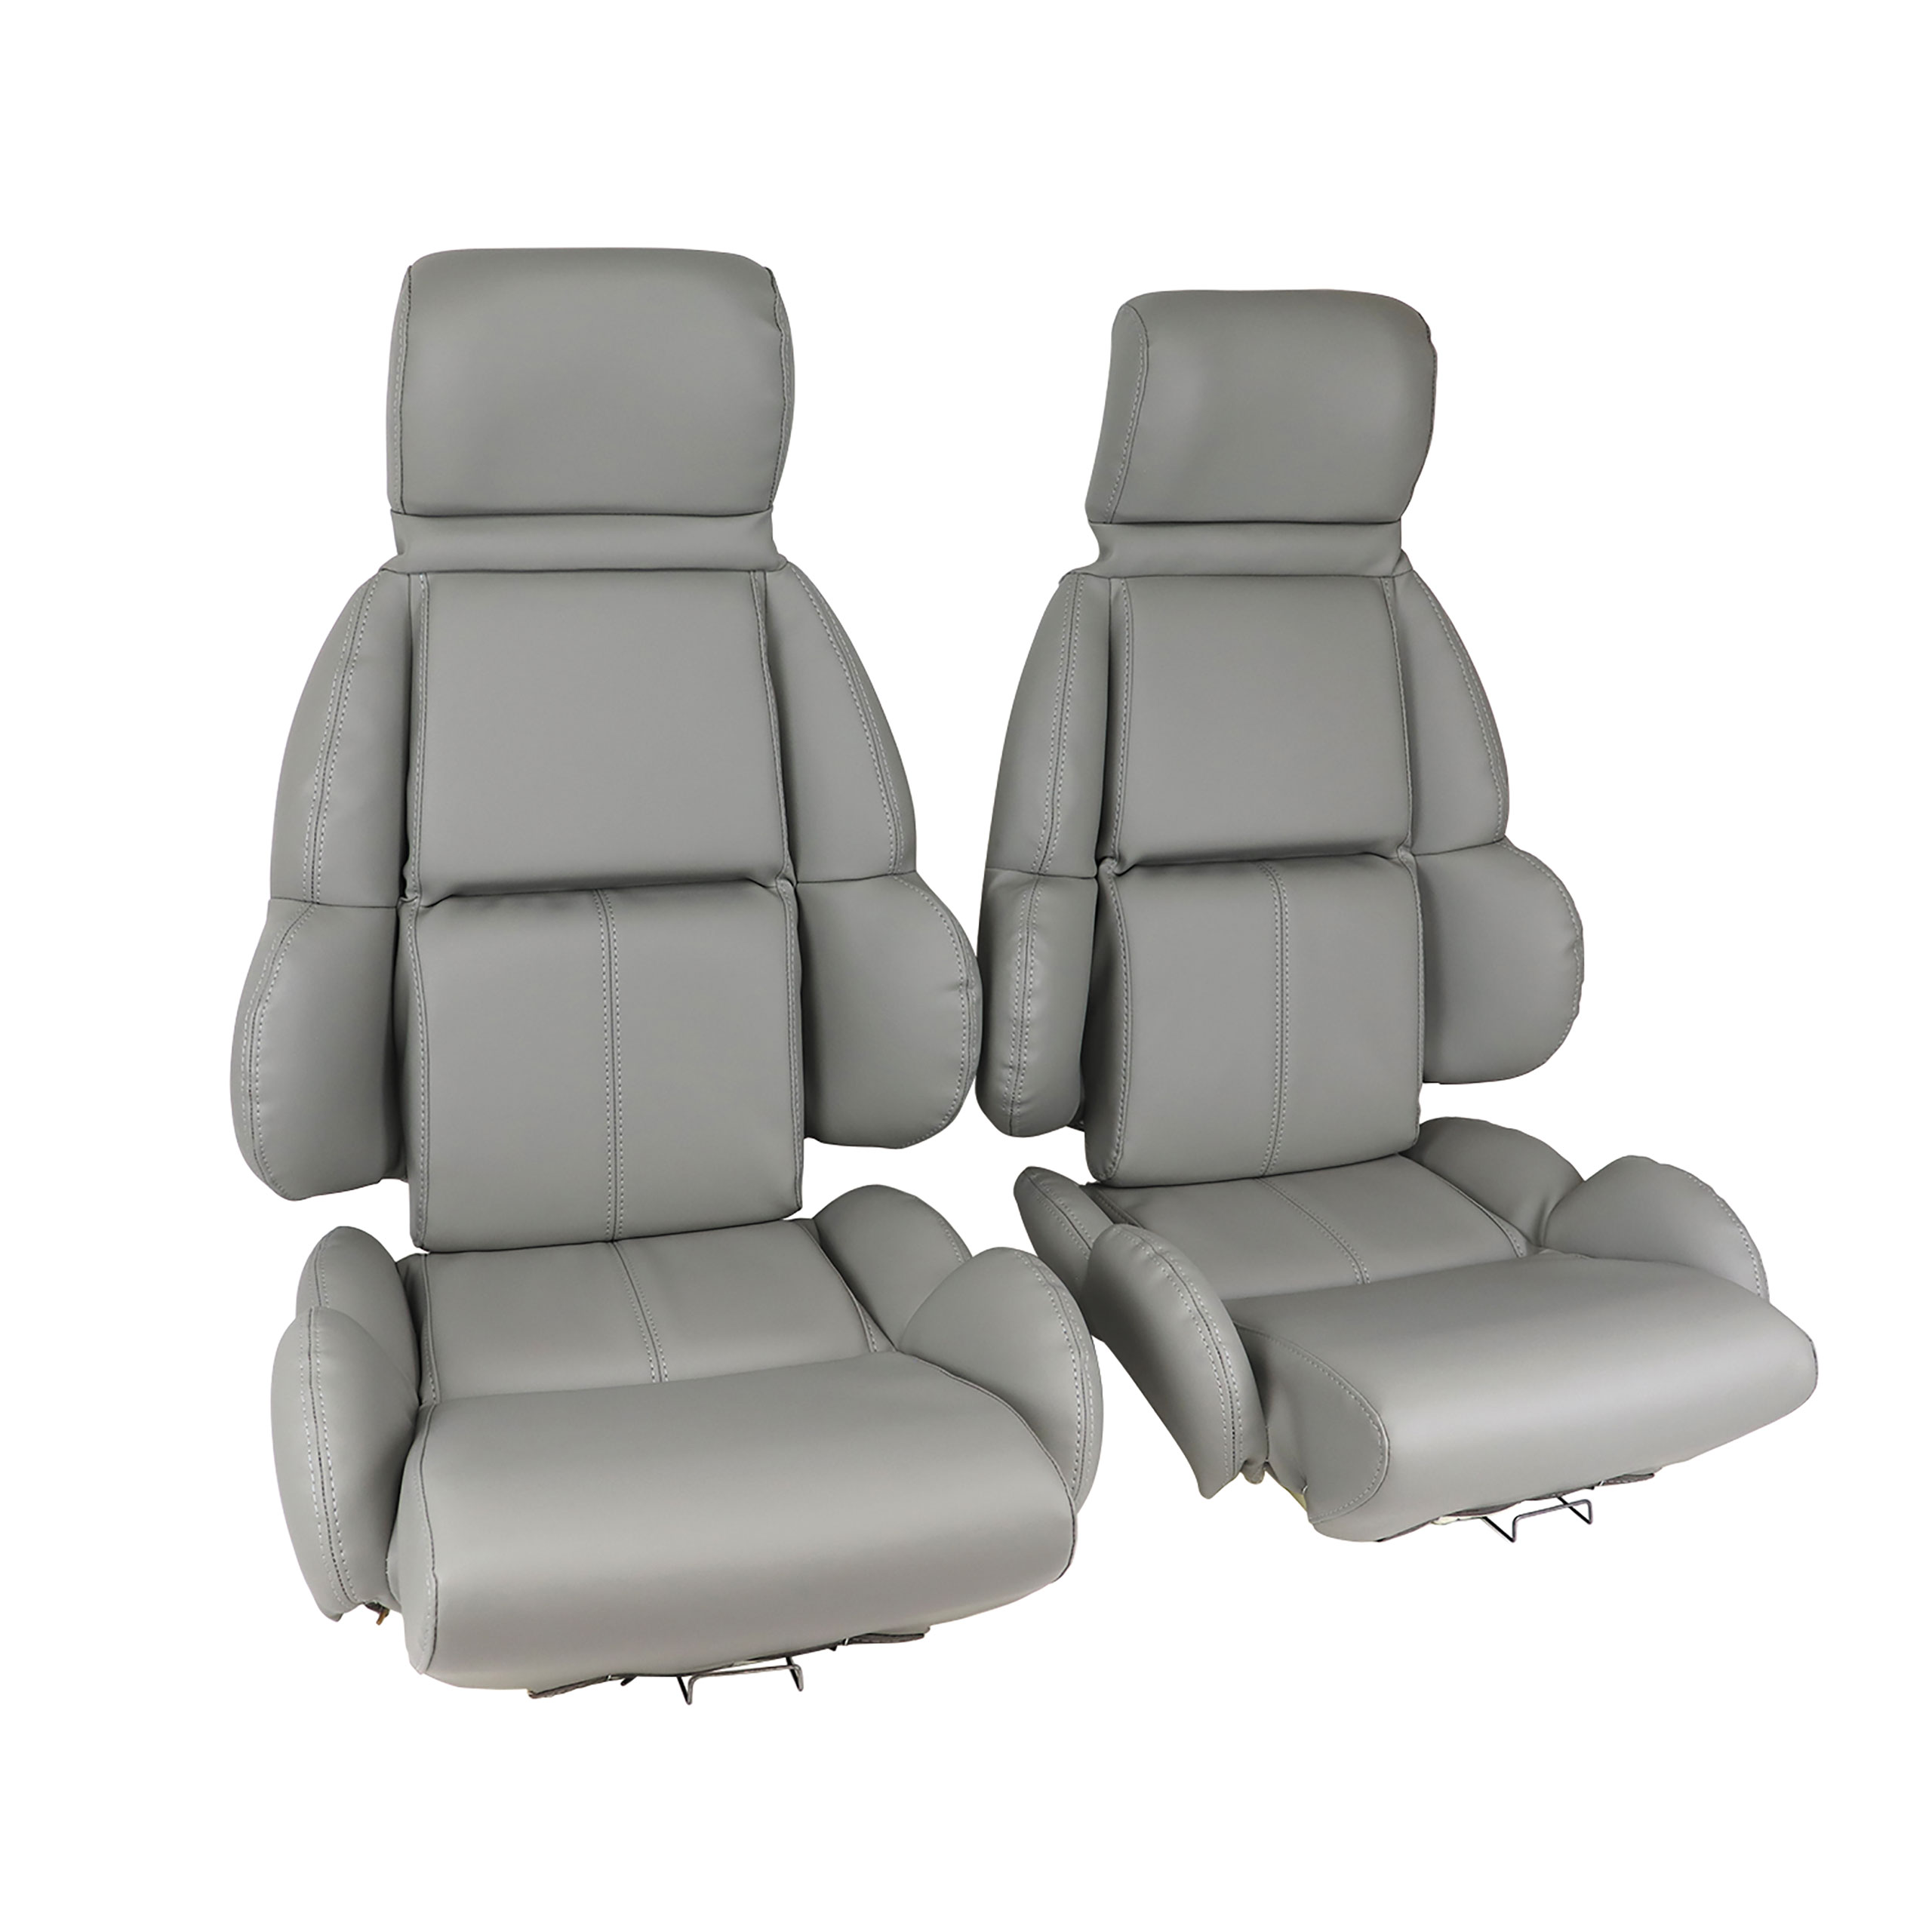 1992 Corvette Mounted "Leather-Like" Vinyl Seat Covers Gray Standard CA-423184